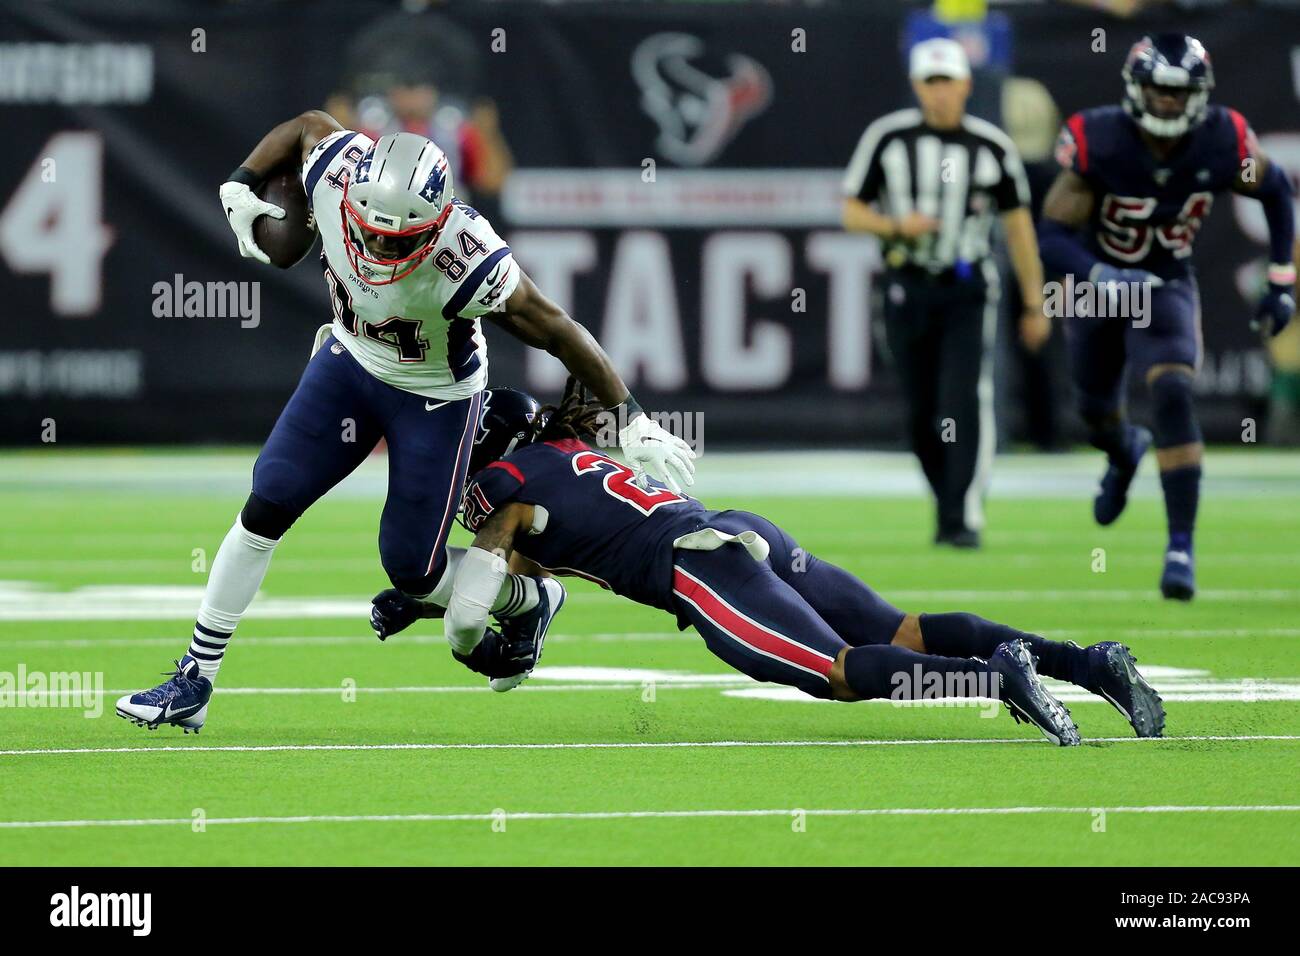 Houston, Texas, USA. 1st Dec, 2019. New England Patriots tight end Benjamin Watson (84) is tackled low by Houston Texans cornerback Bradley Roby (21) after a pass reception during the third quarter of the NFL regular season game between the Houston Texans and the New England Patriots at NRG Stadium in Houston, TX on December 1, 2019. Credit: Erik Williams/ZUMA Wire/Alamy Live News Stock Photo